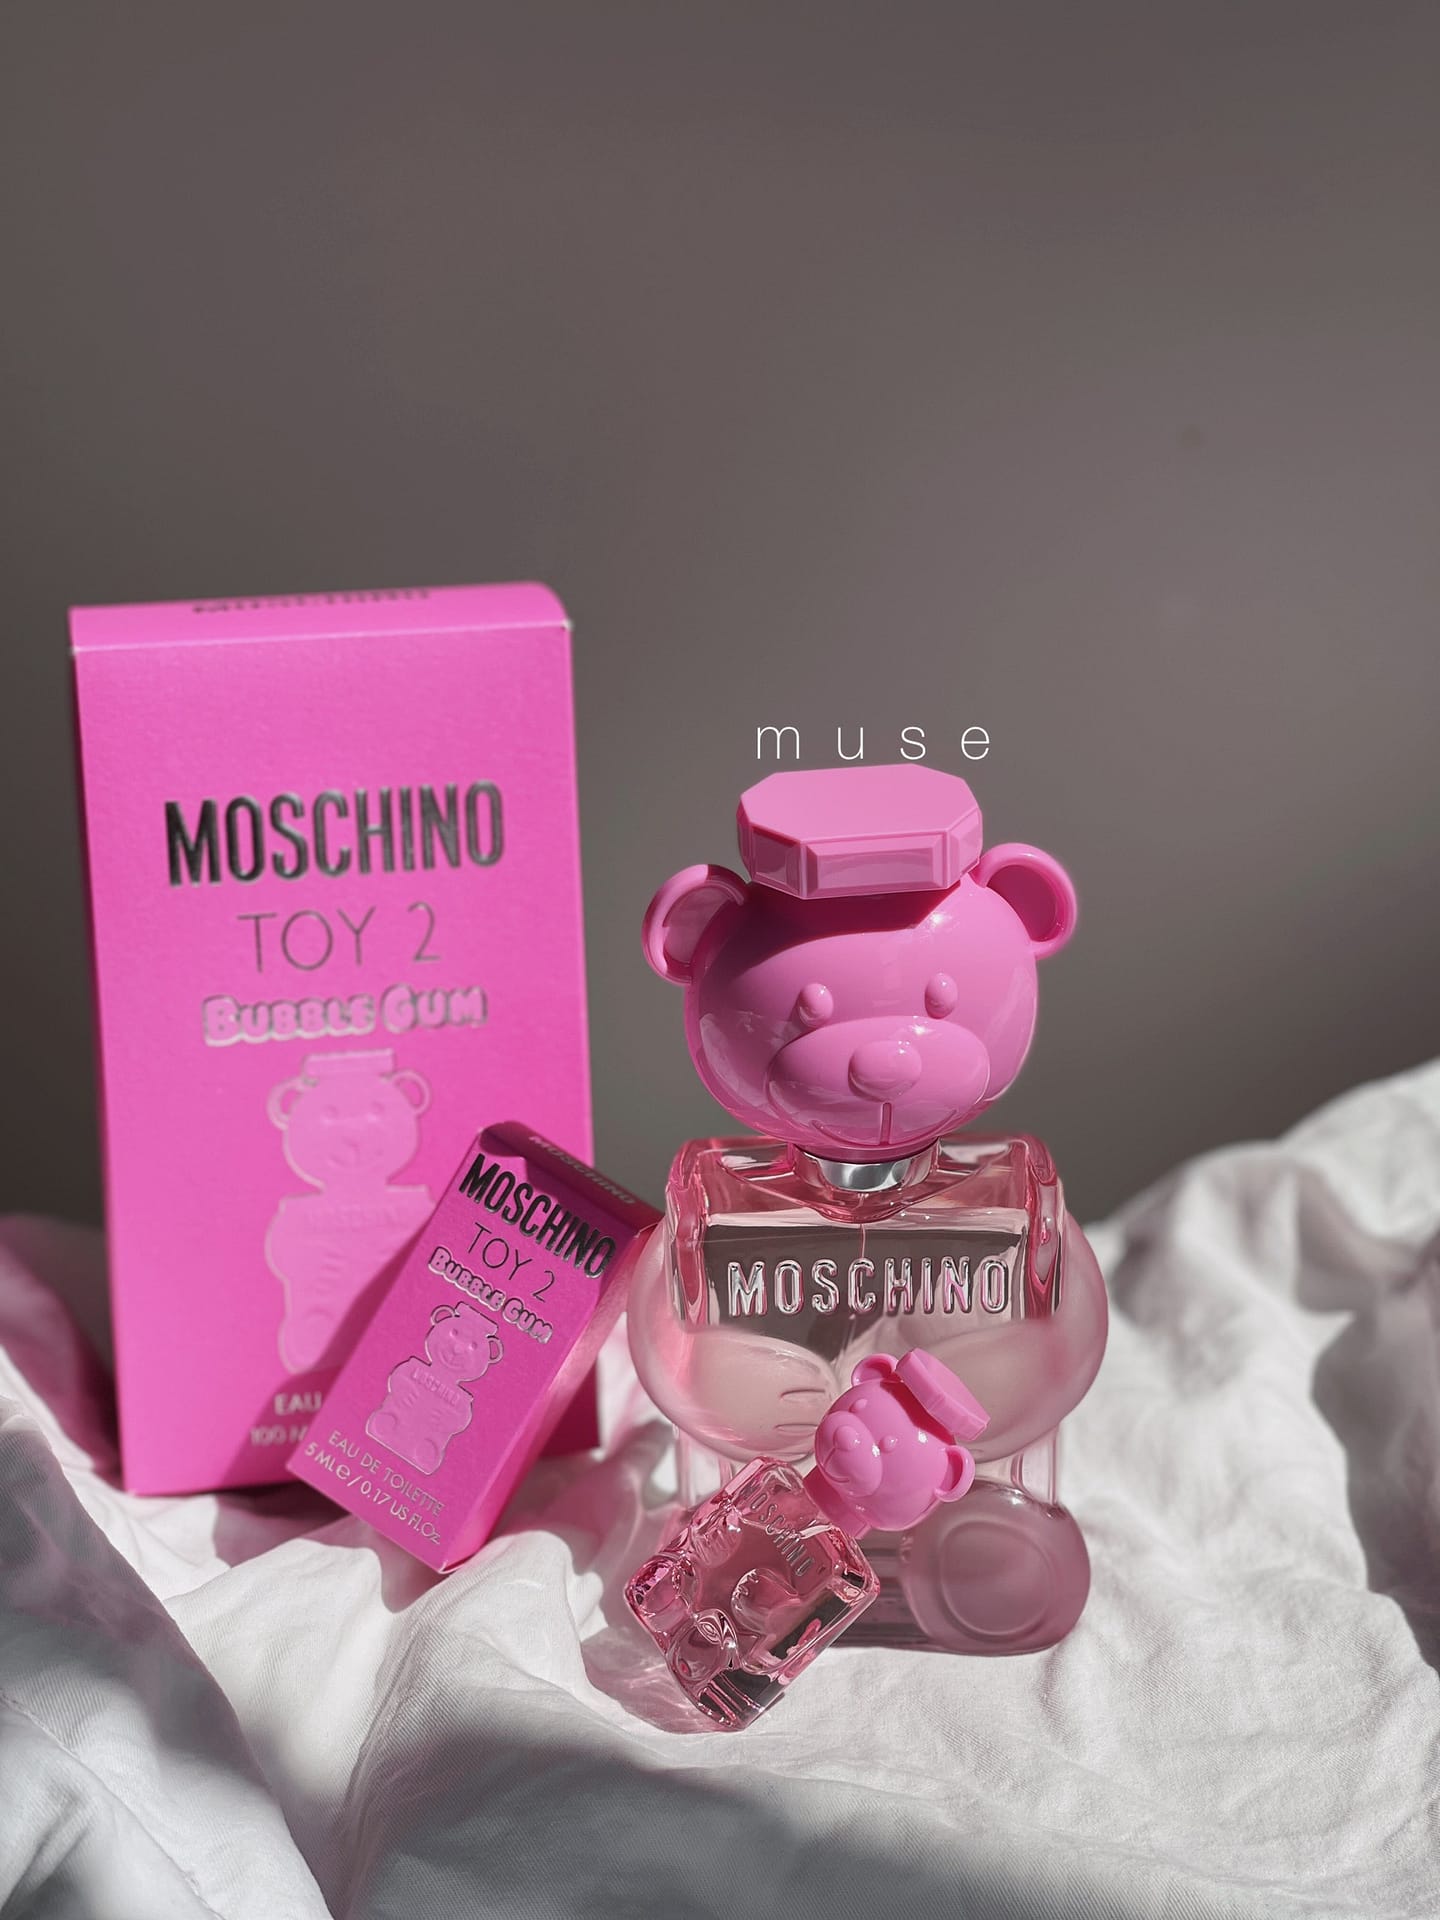 Moschino Toy 2 Bubble Gum EDT - Muse Perfume